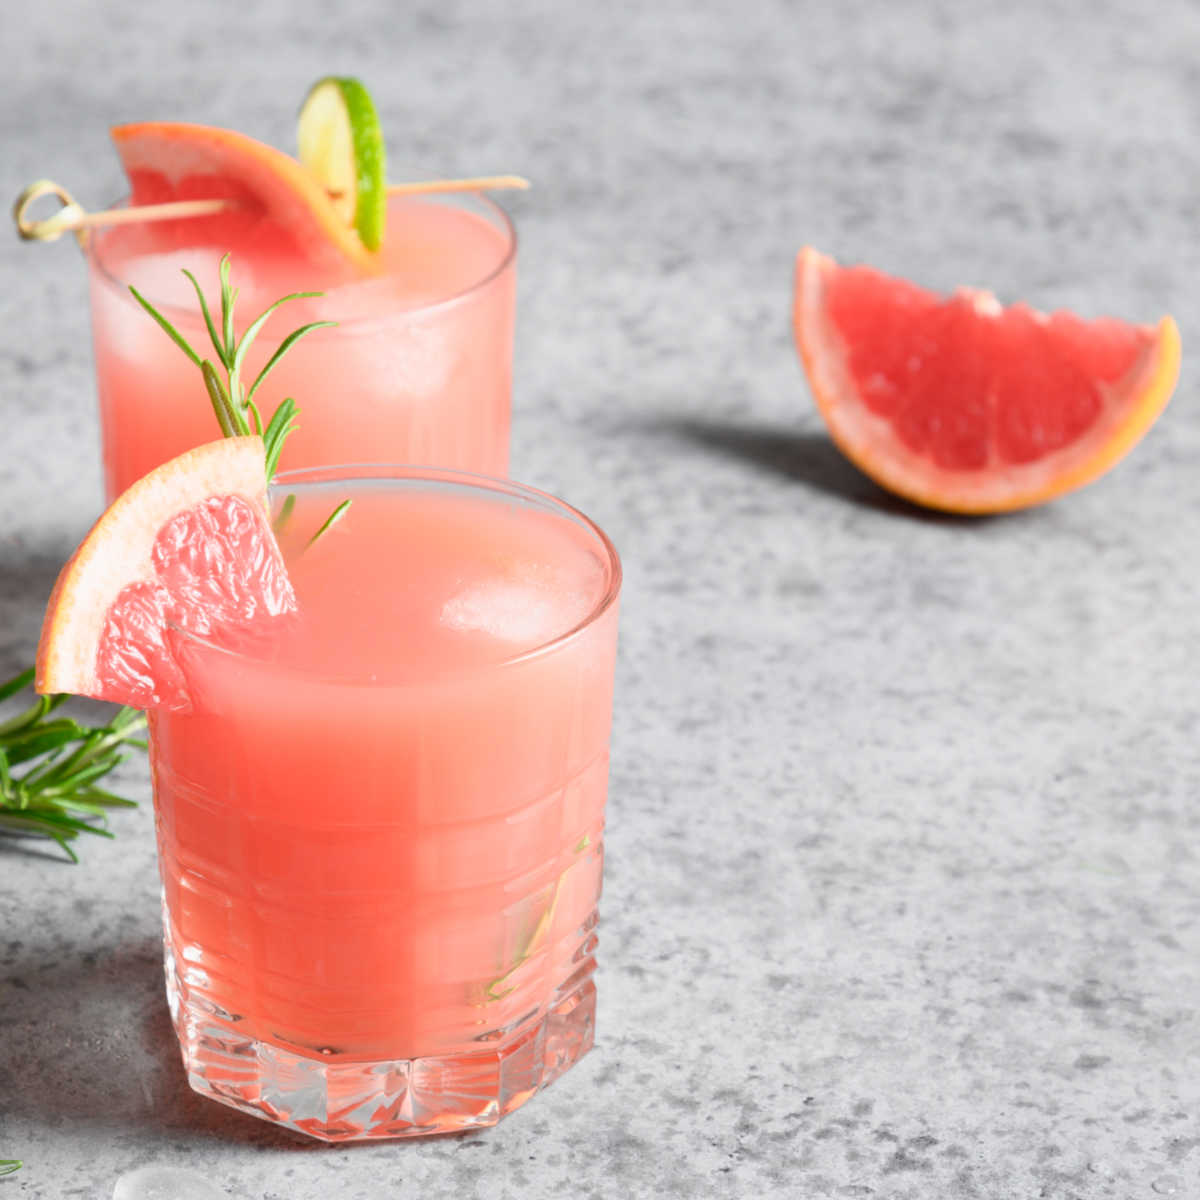 Grapefruit drink with lime and rosemary